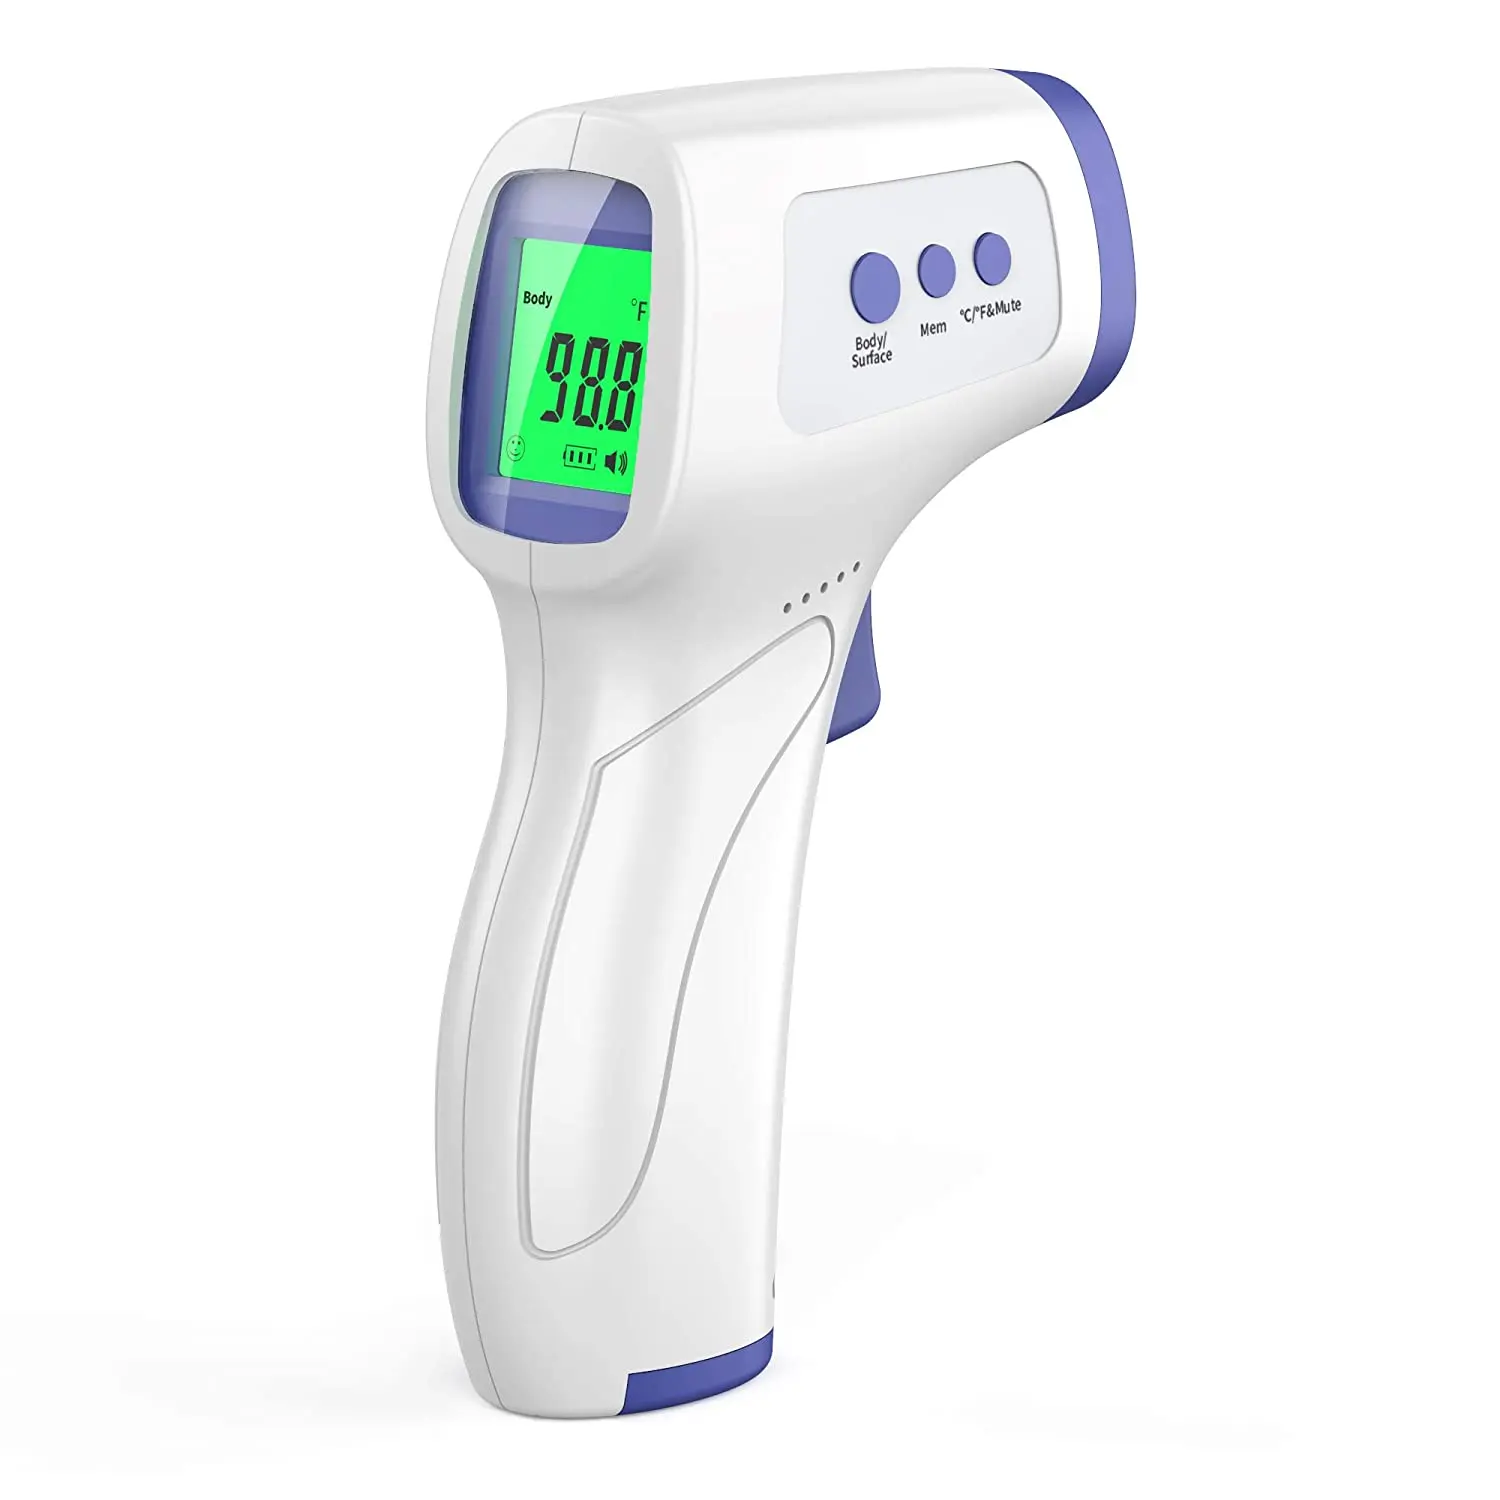 Baby Adult Non Contact Digital LCD Infrared Medical Body Forehead Thermometer Thermometers 